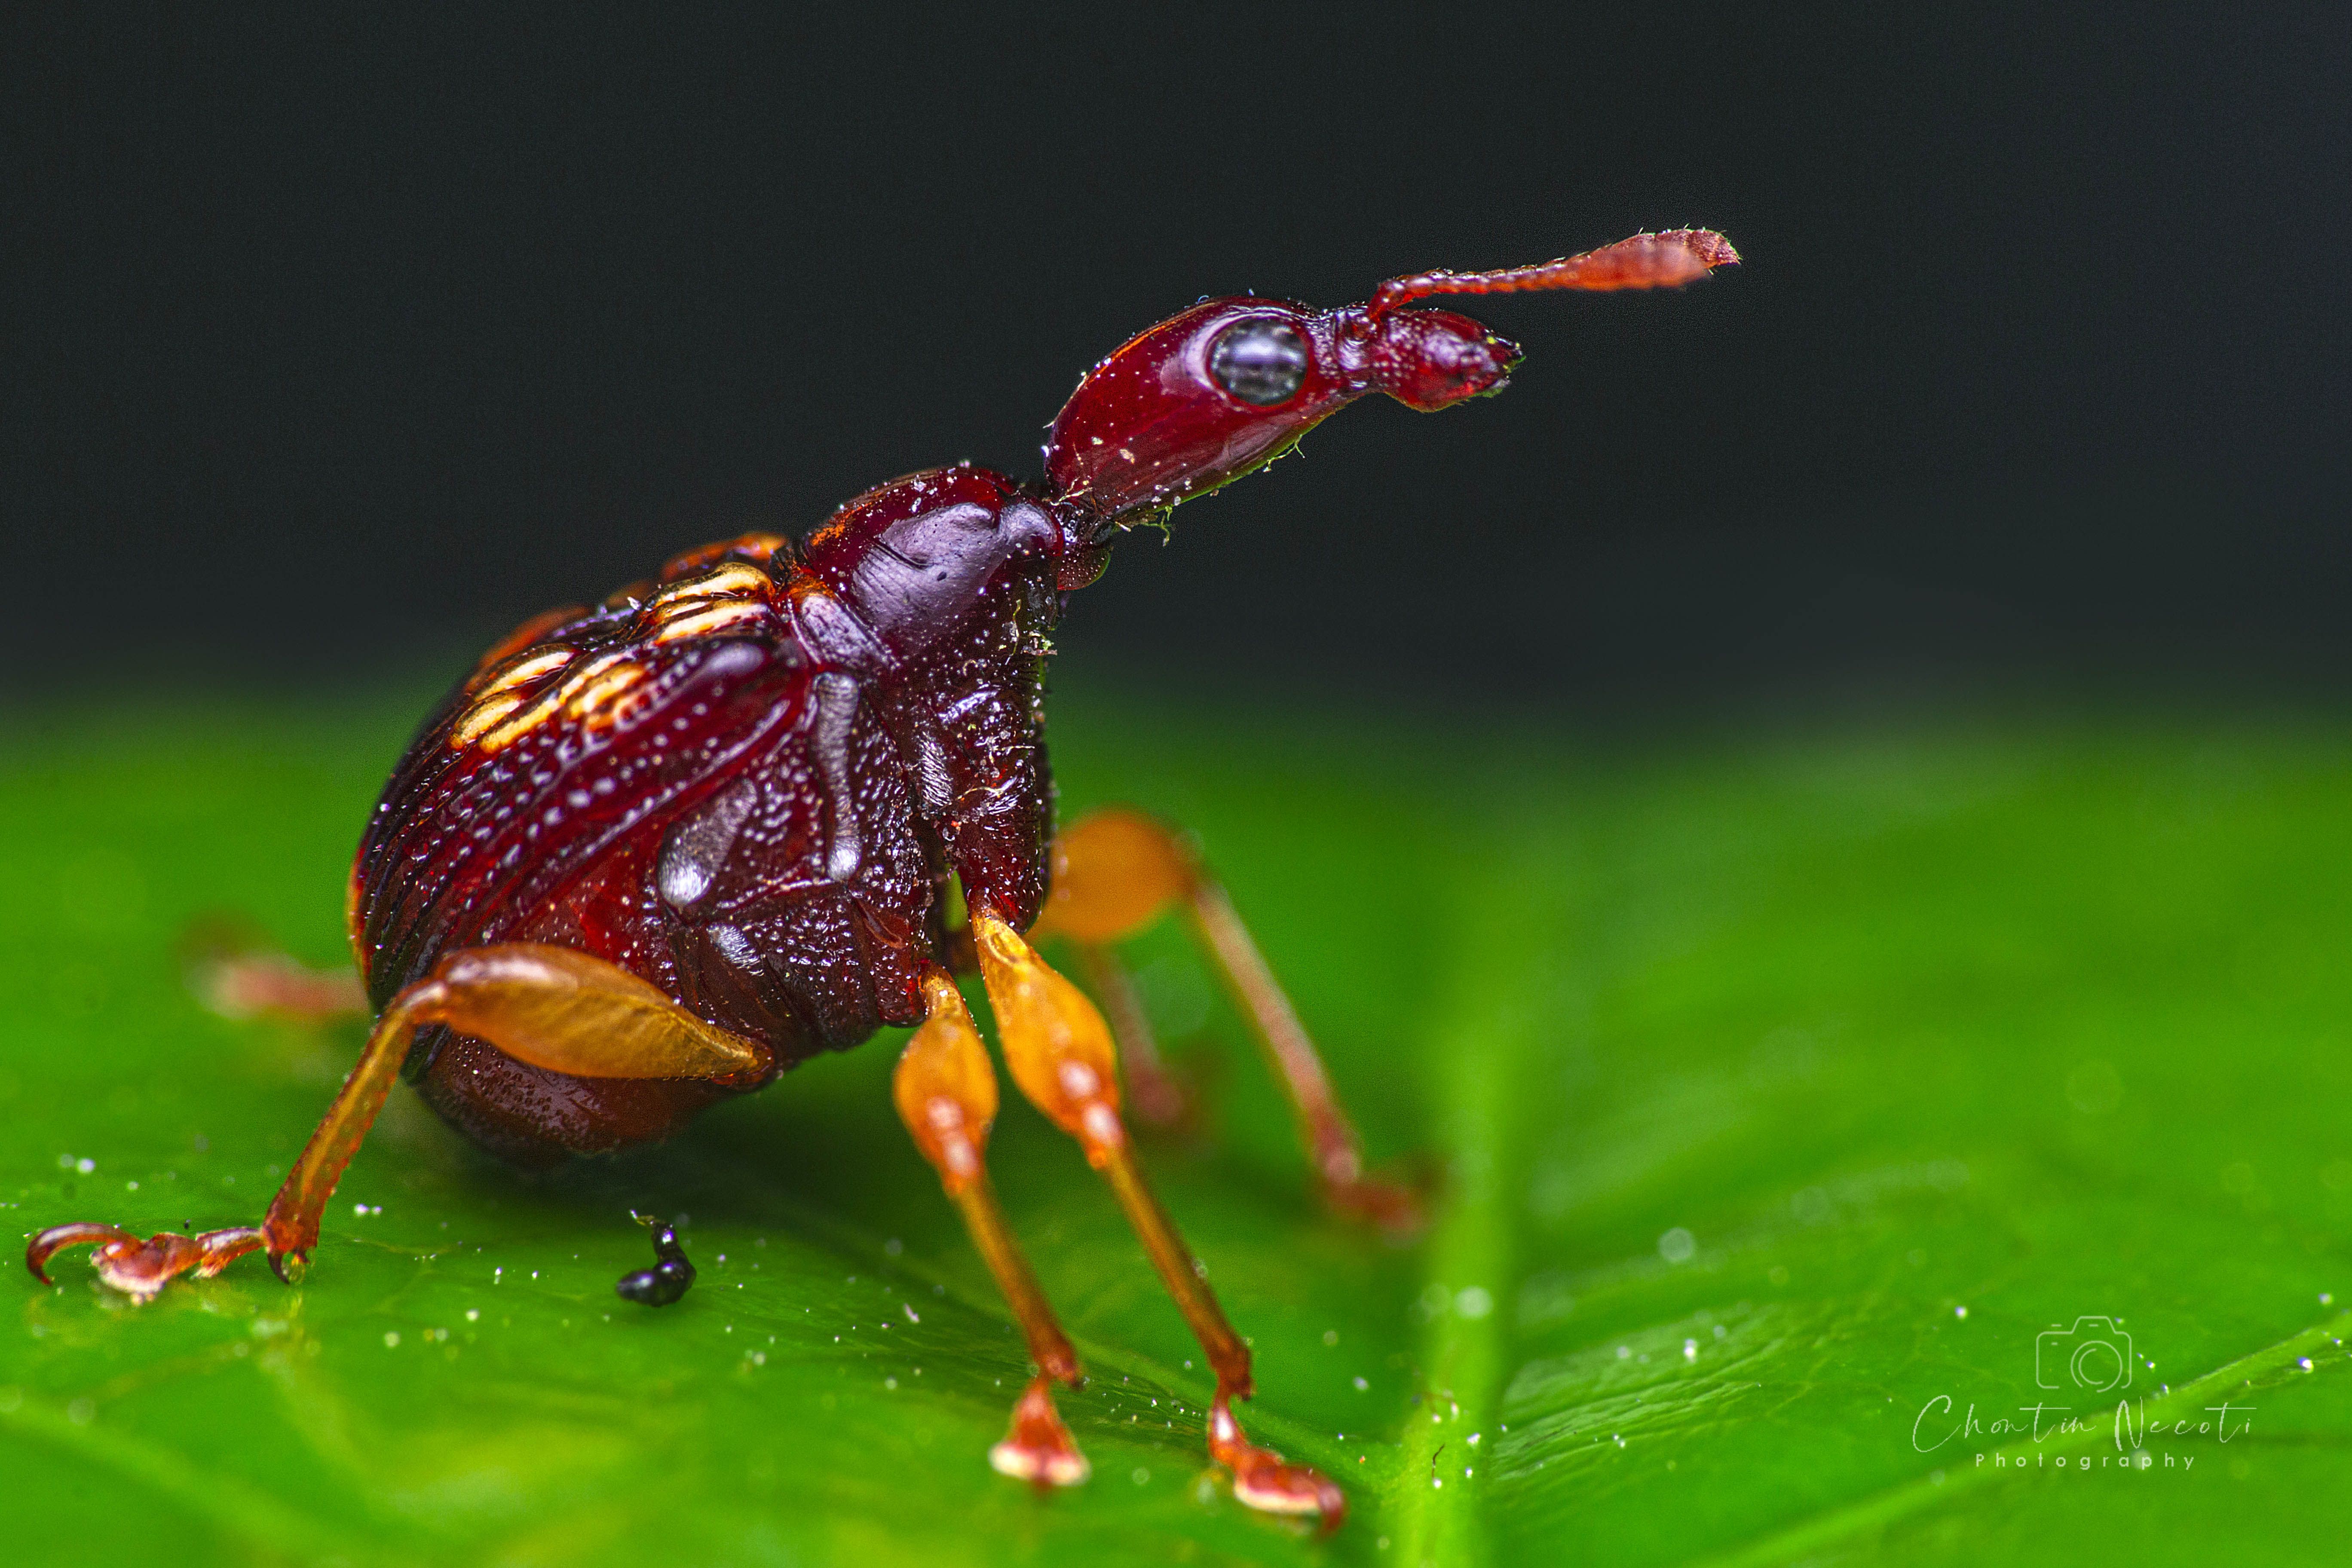 Leaf-rolling weevil, insect, macro, garden, small, animal, long neck, beauty, beautiful, close up, nature, natural, NeCoTi ChonTin